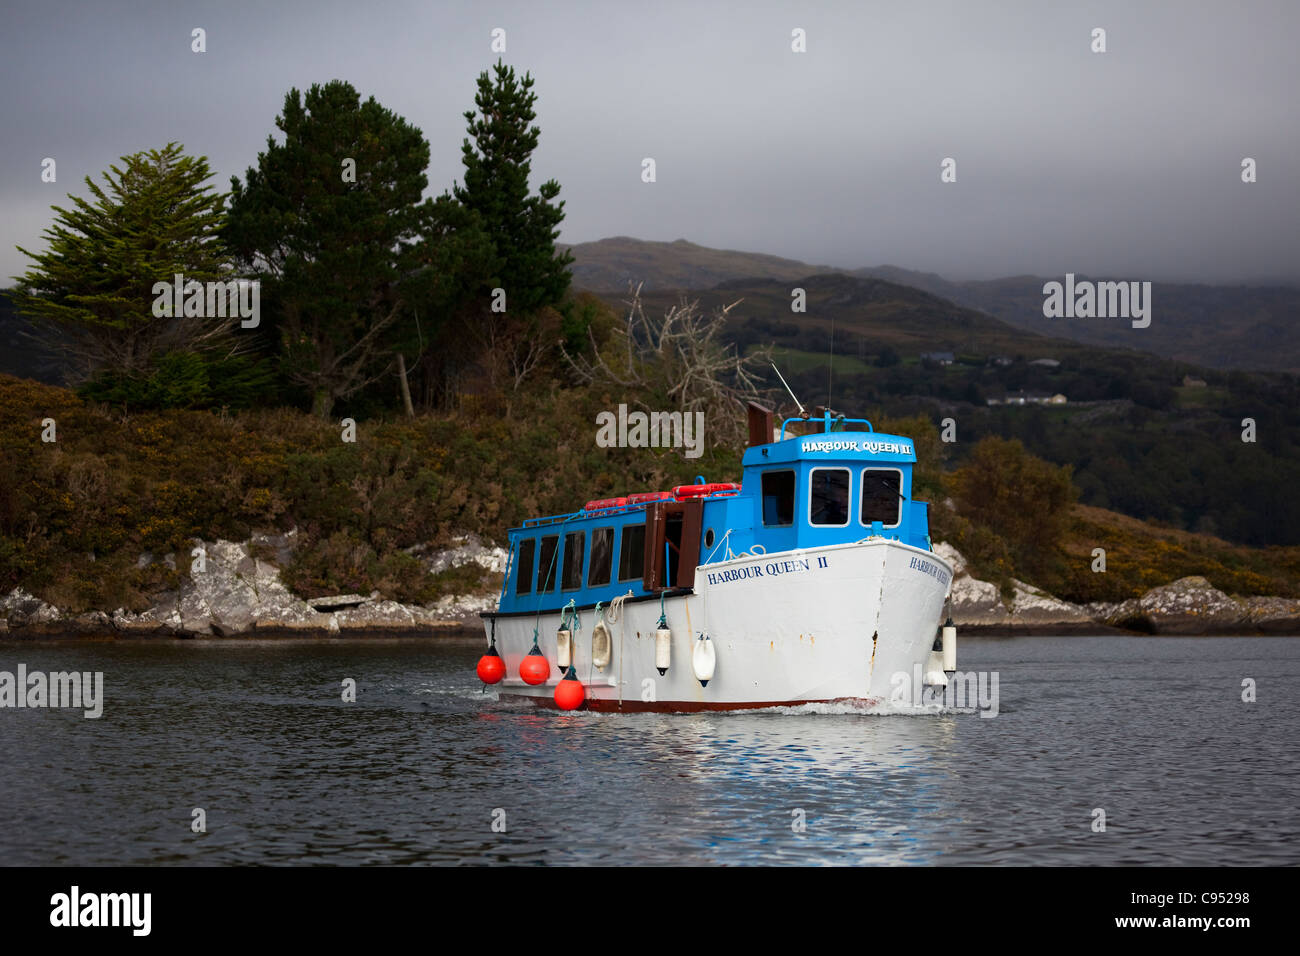 The Harbour Queen II ferry to to the tropical gardens of Garinish Island, Glengarriff, West Cork, Ireland Stock Photo